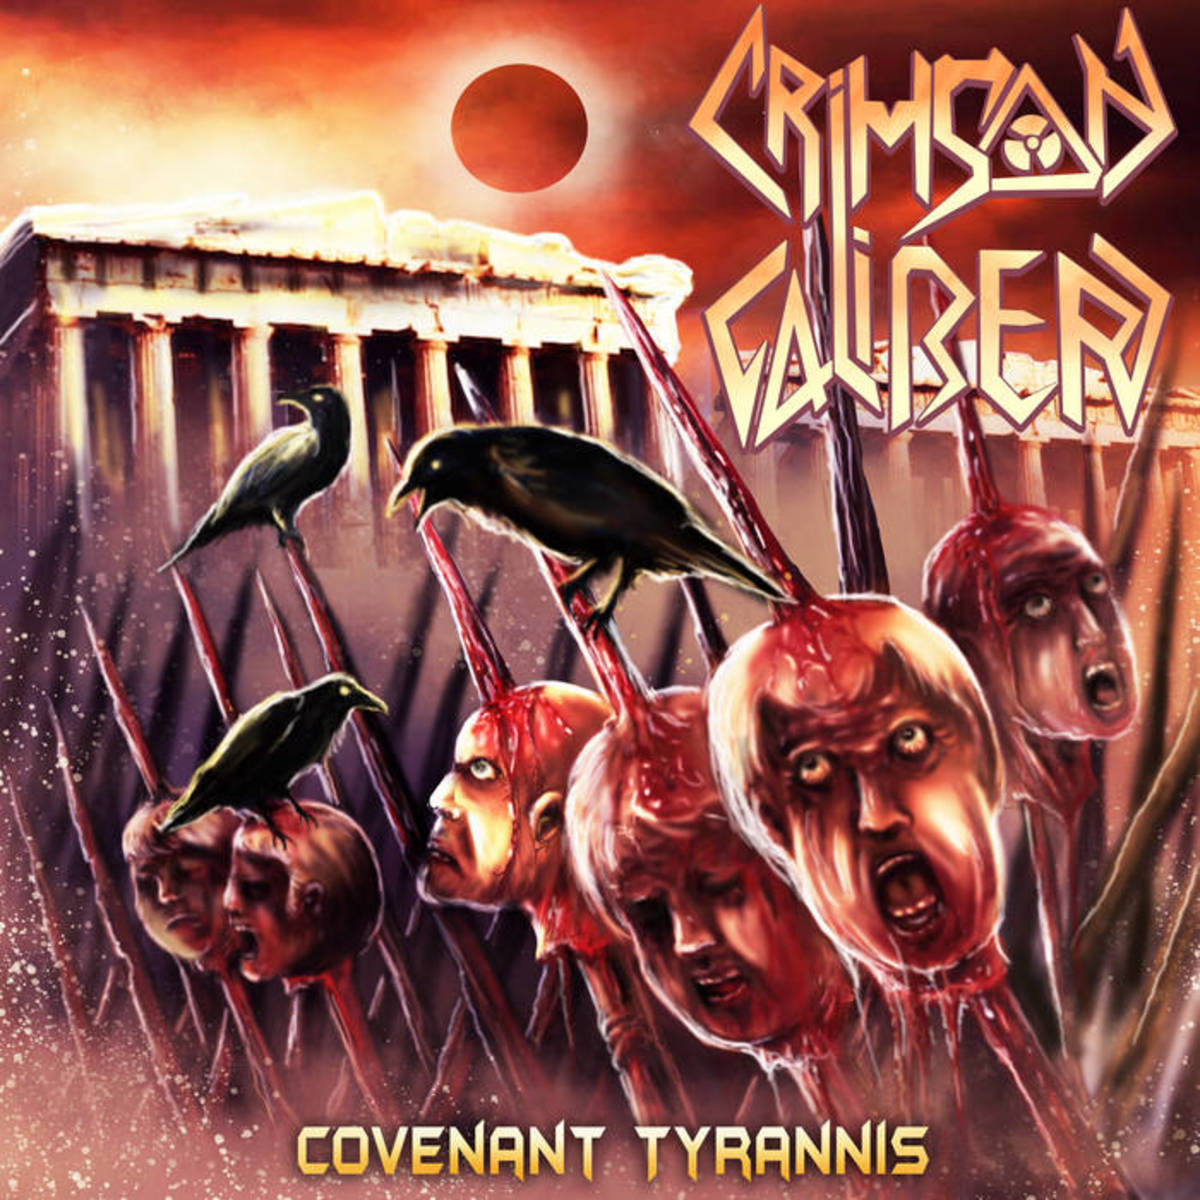 review-of-the-album-covenant-tyrannis-by-canadian-thrash-metal-band-crimson-caliber